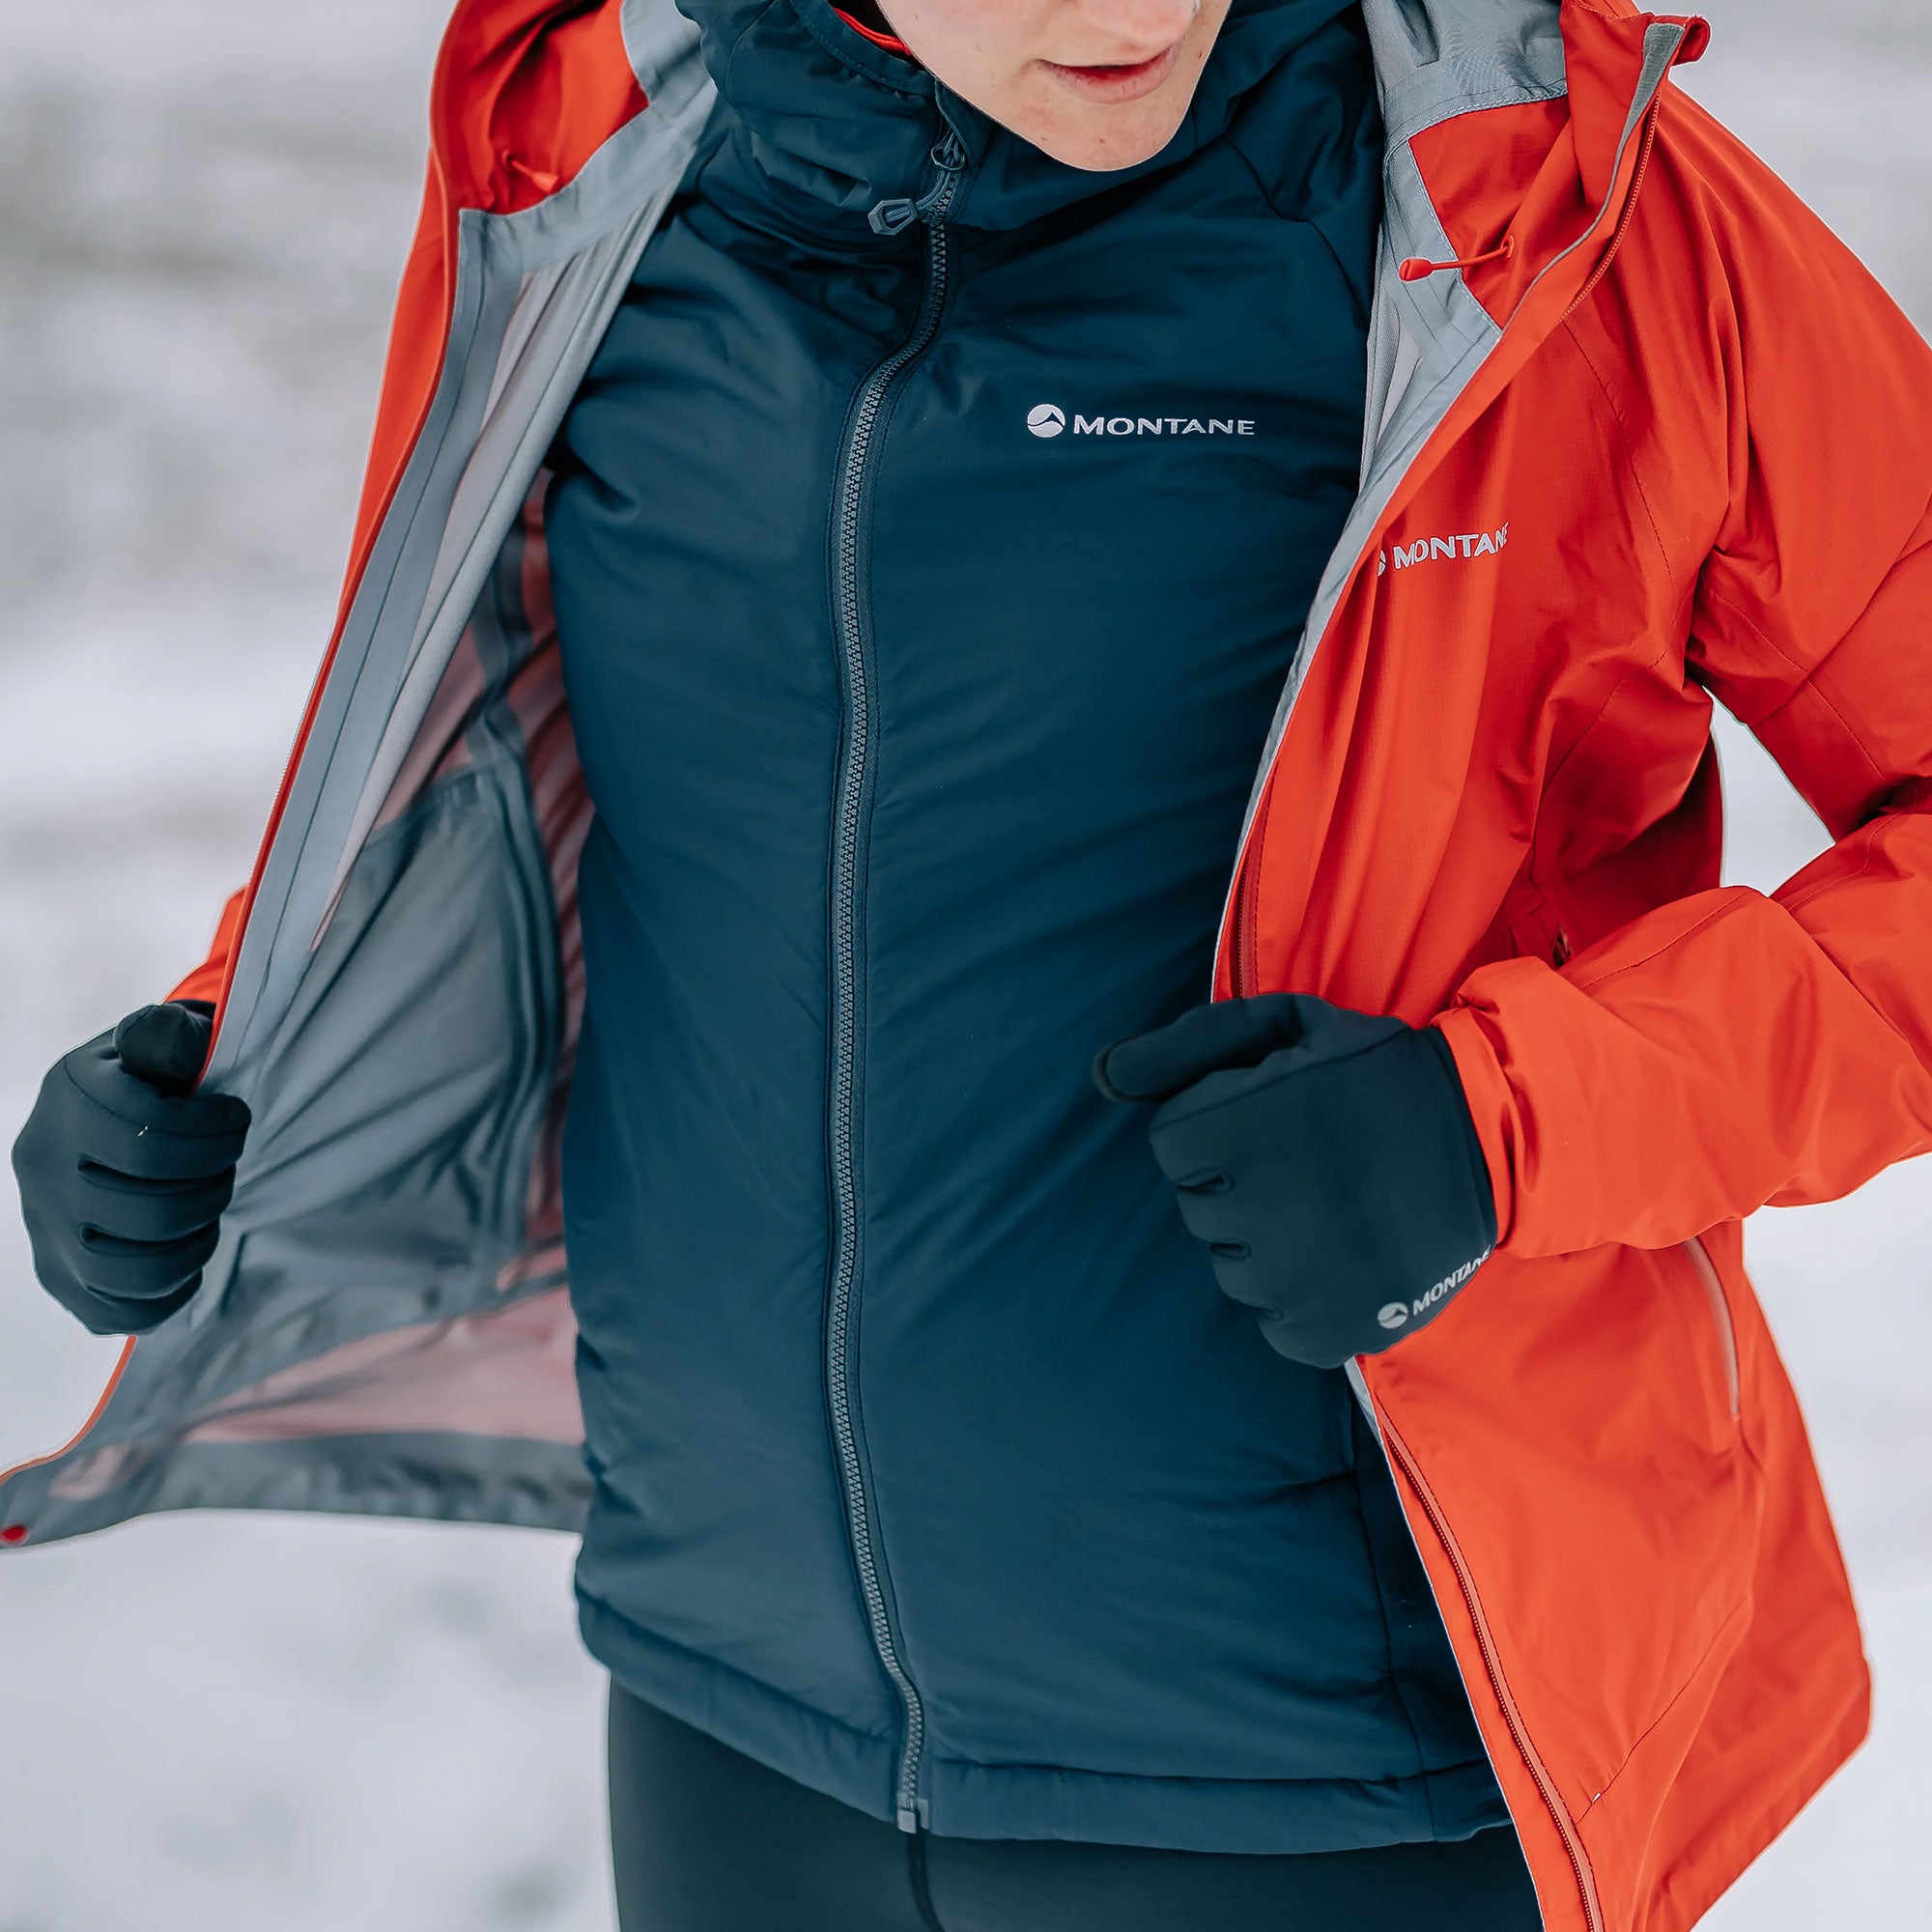 Women's Insulated Jackets  Waterproof, Warm and Comfortable